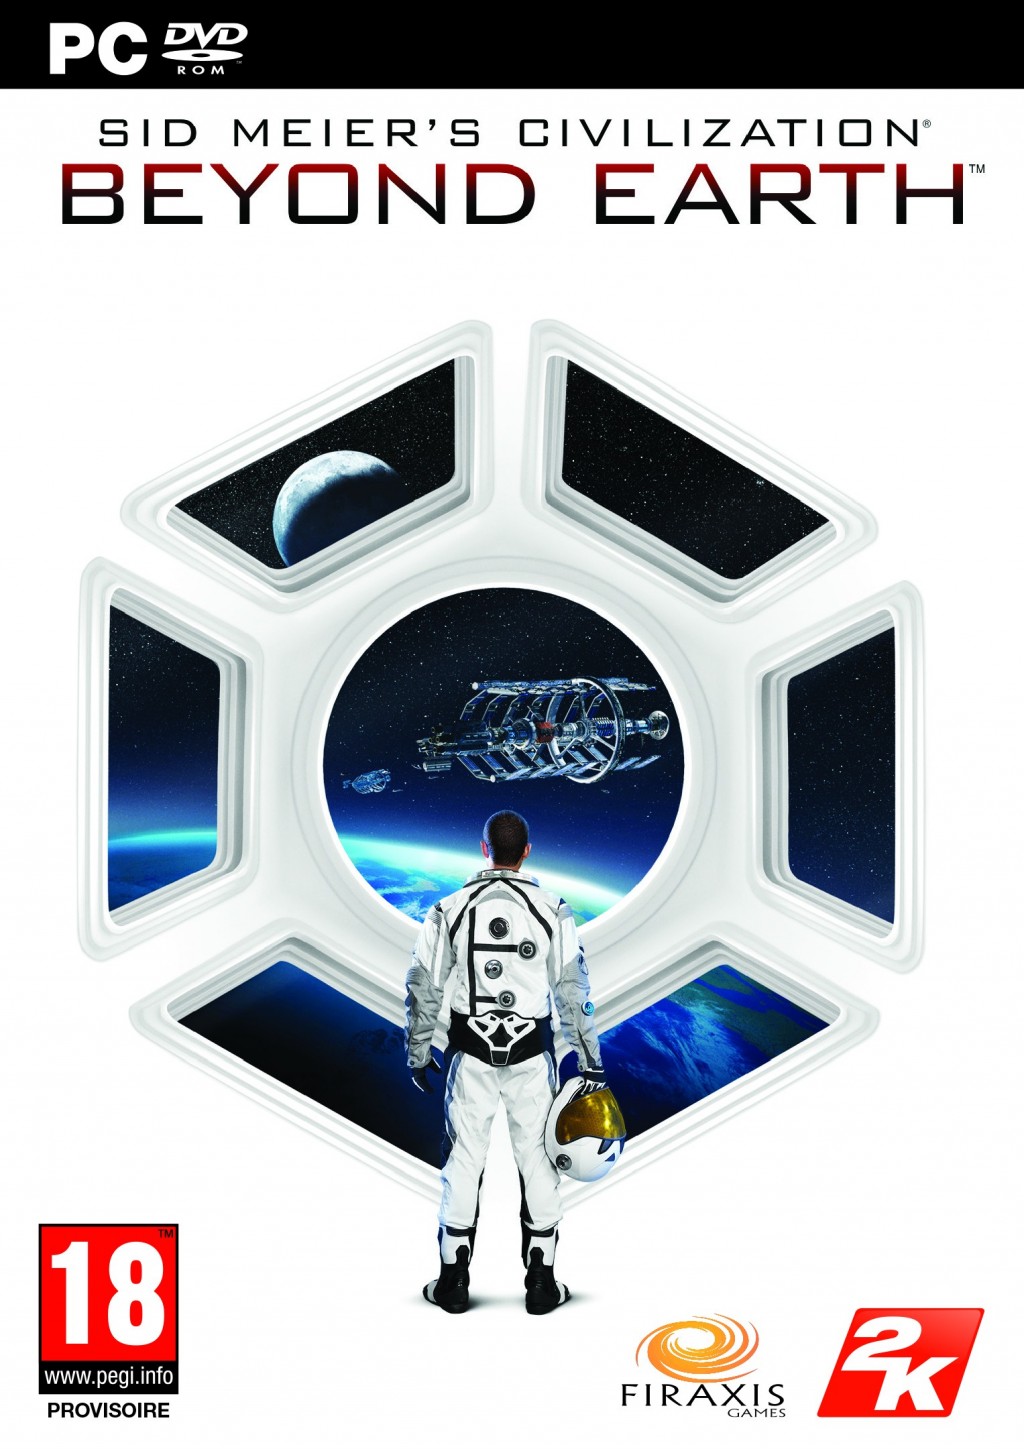 Firaxis Releases their Second Video Showcasing Sid Meier’s “Beyond Earth” - Pete Murray and David McDonough Discuss Seeded Starts, Non-Historical Civilization, and Space Adventures